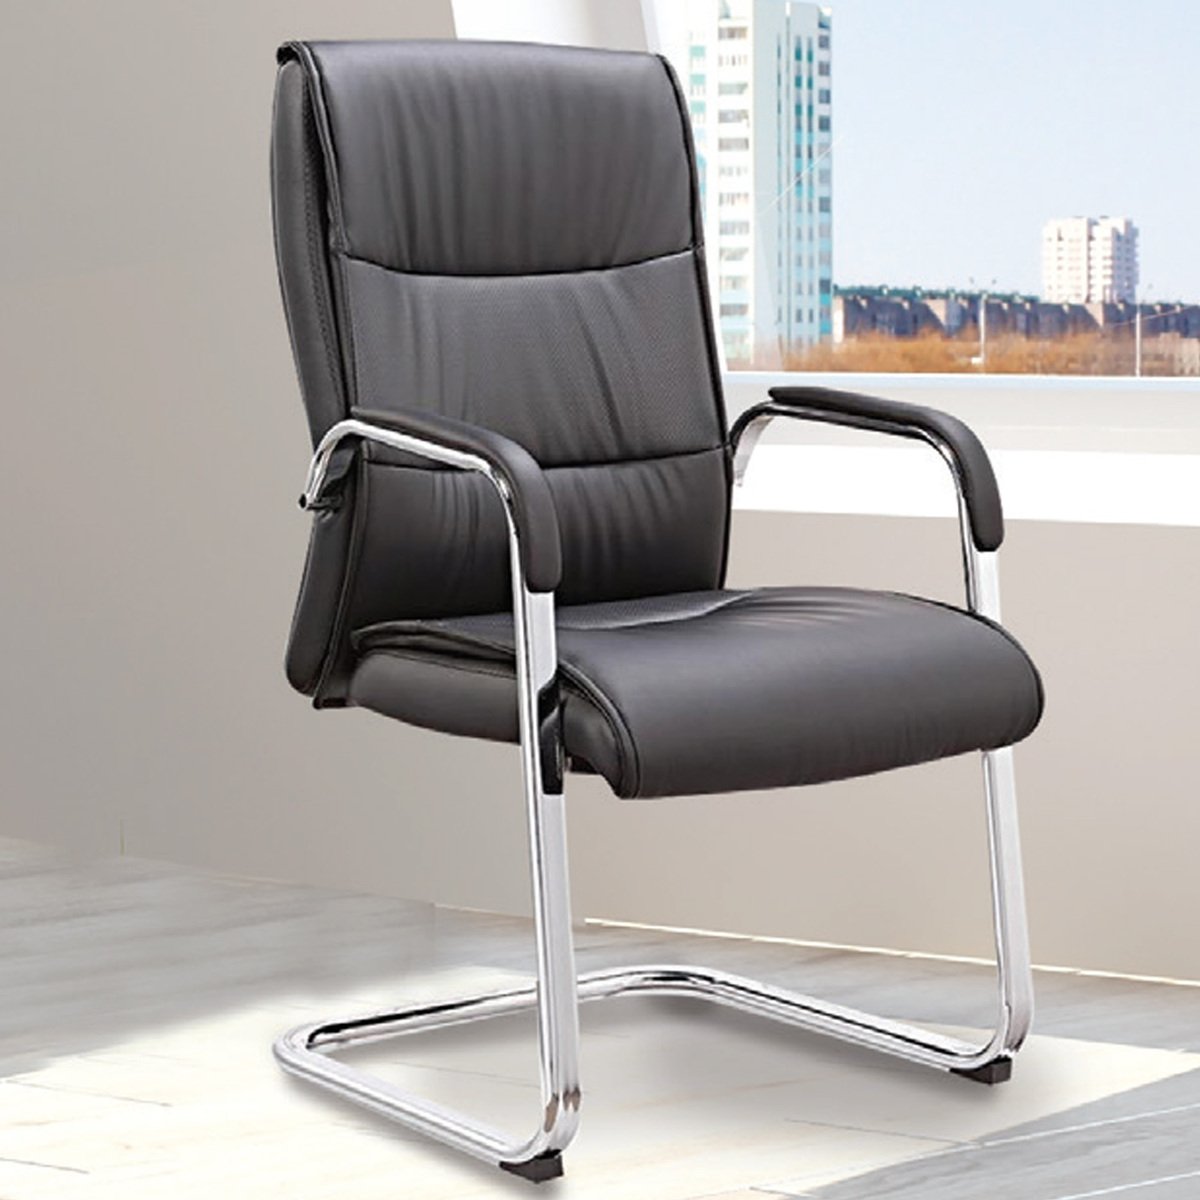 Maple Leaf Visitor Chair PU BE107 Black